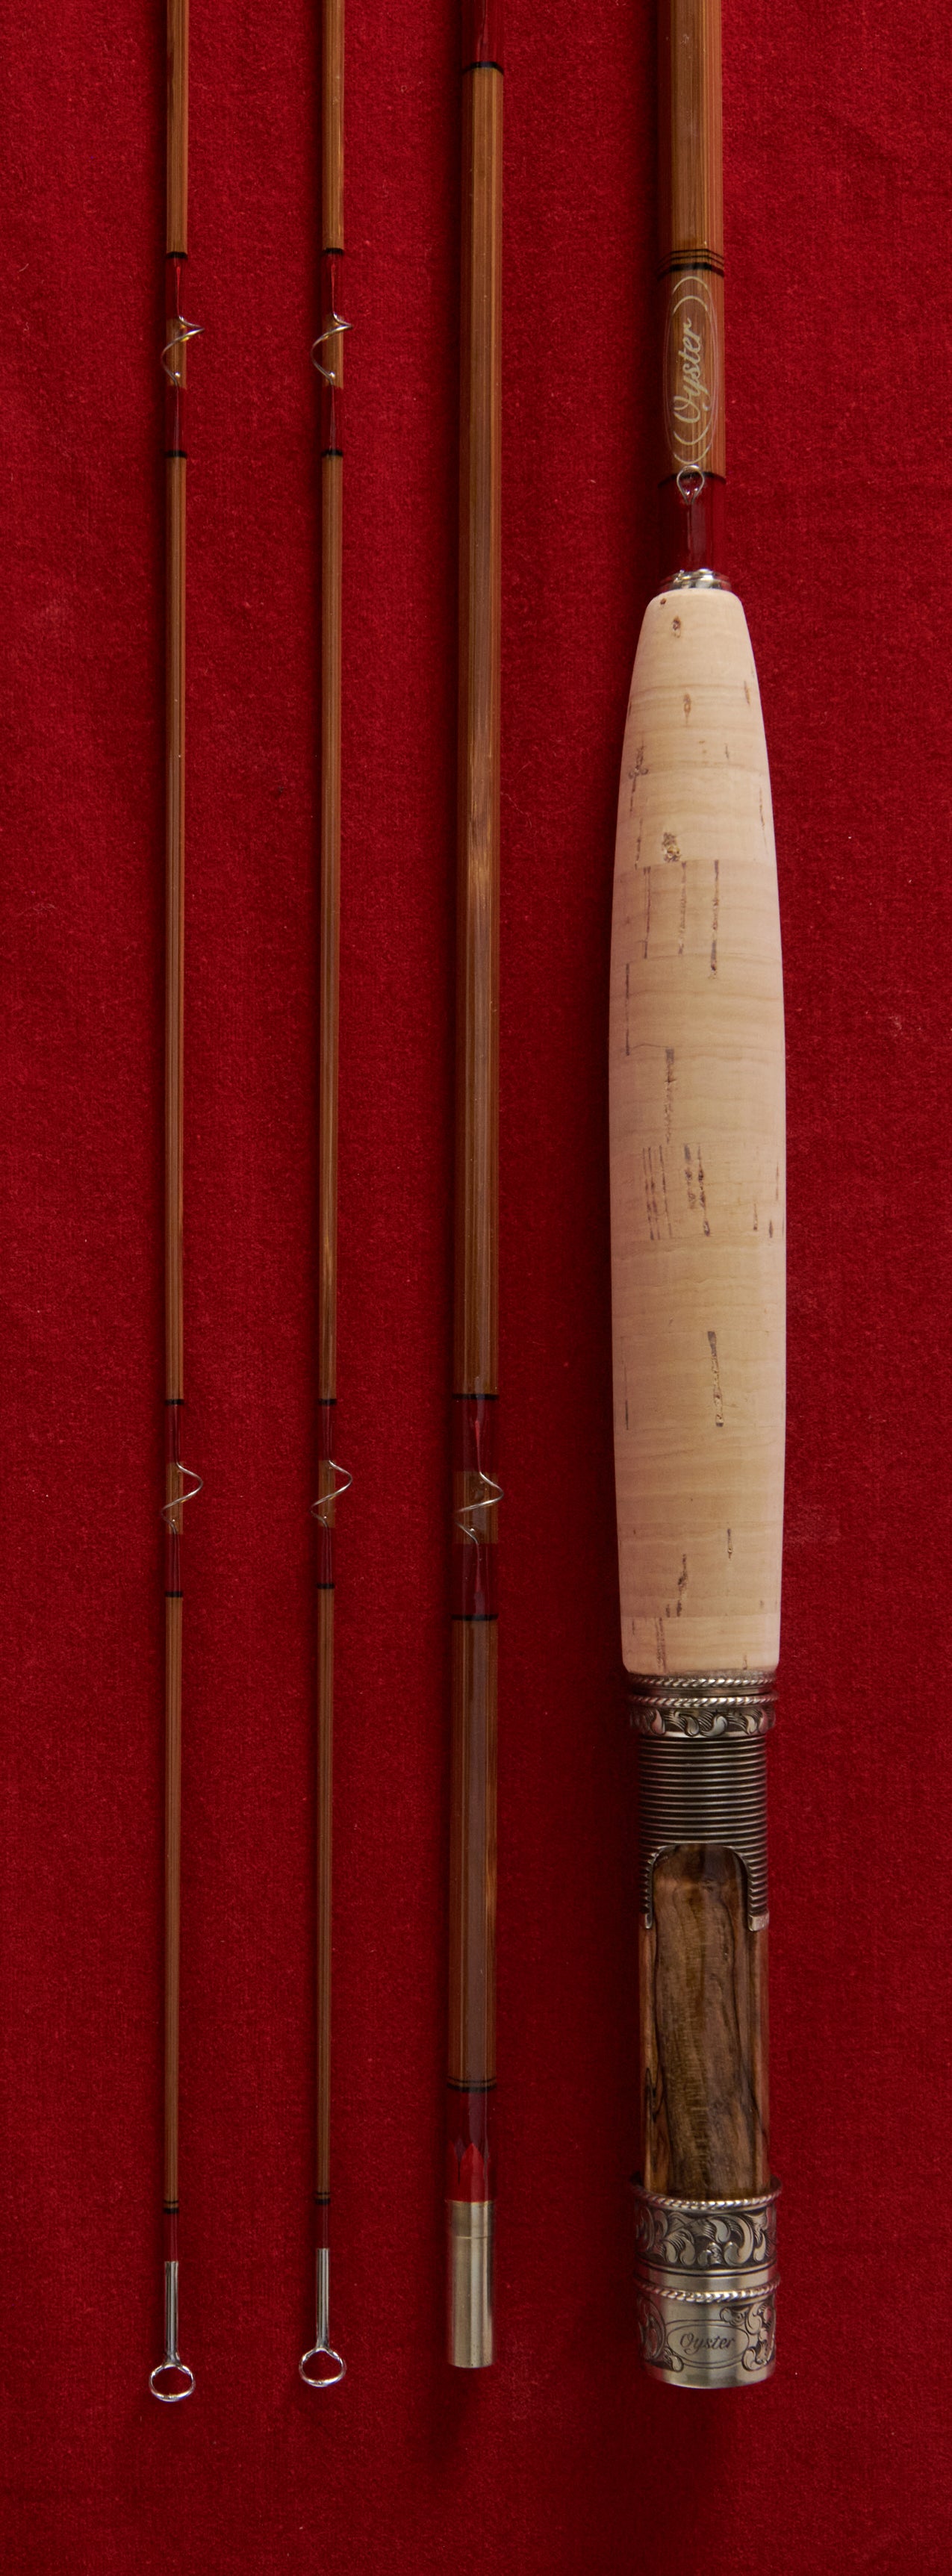 http://oysterbamboo.com/cdn/shop/files/7ft_9in_5wt_Oyster_Bamboo_Fly_Rod_Master_Series.jpg?v=1712236127